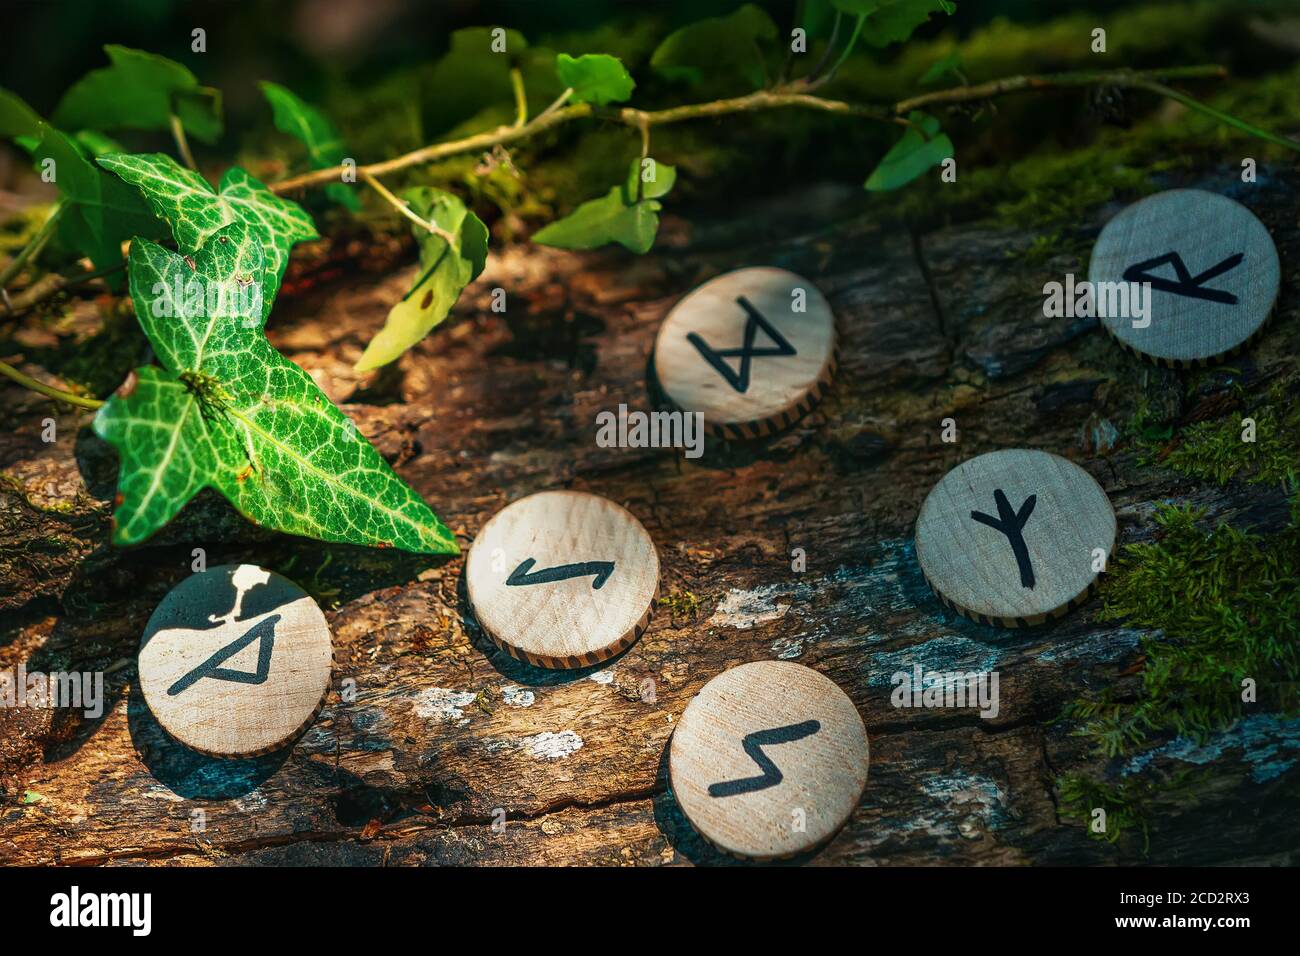 On the trunk of a tree, covered with ivy, are wooden Scandinavian runes. The concept of divination and esotericism. Dark colors. Stock Photo